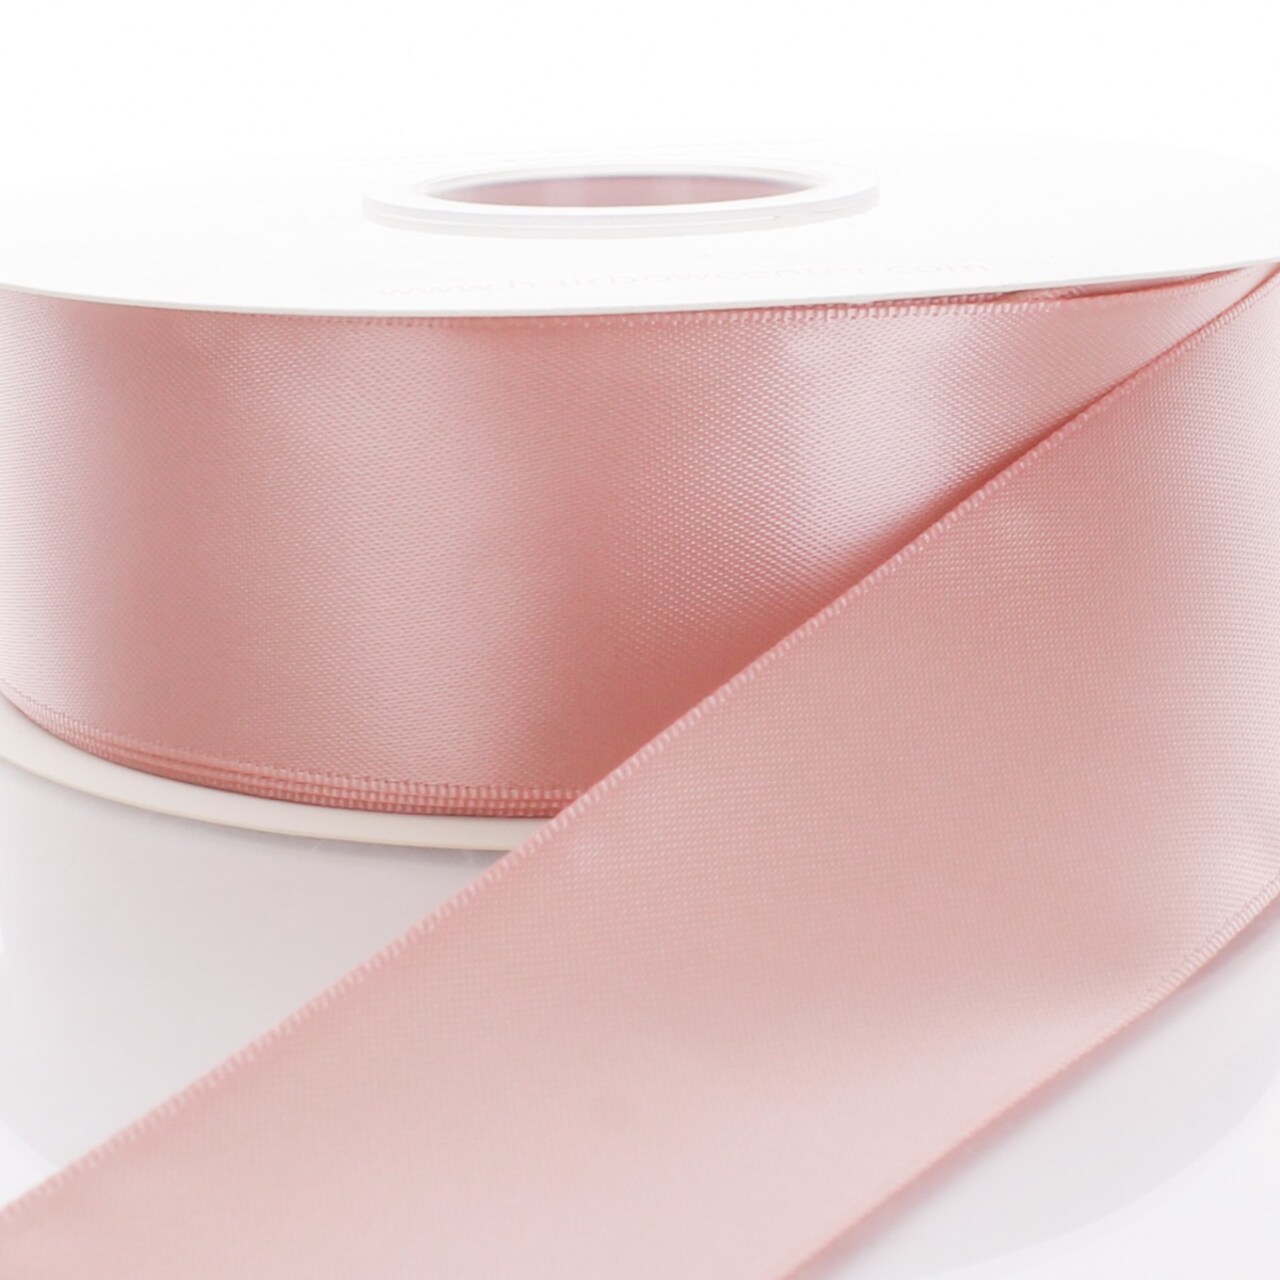 3 Double Faced Satin Ribbon 161 Rose Gold 25yd